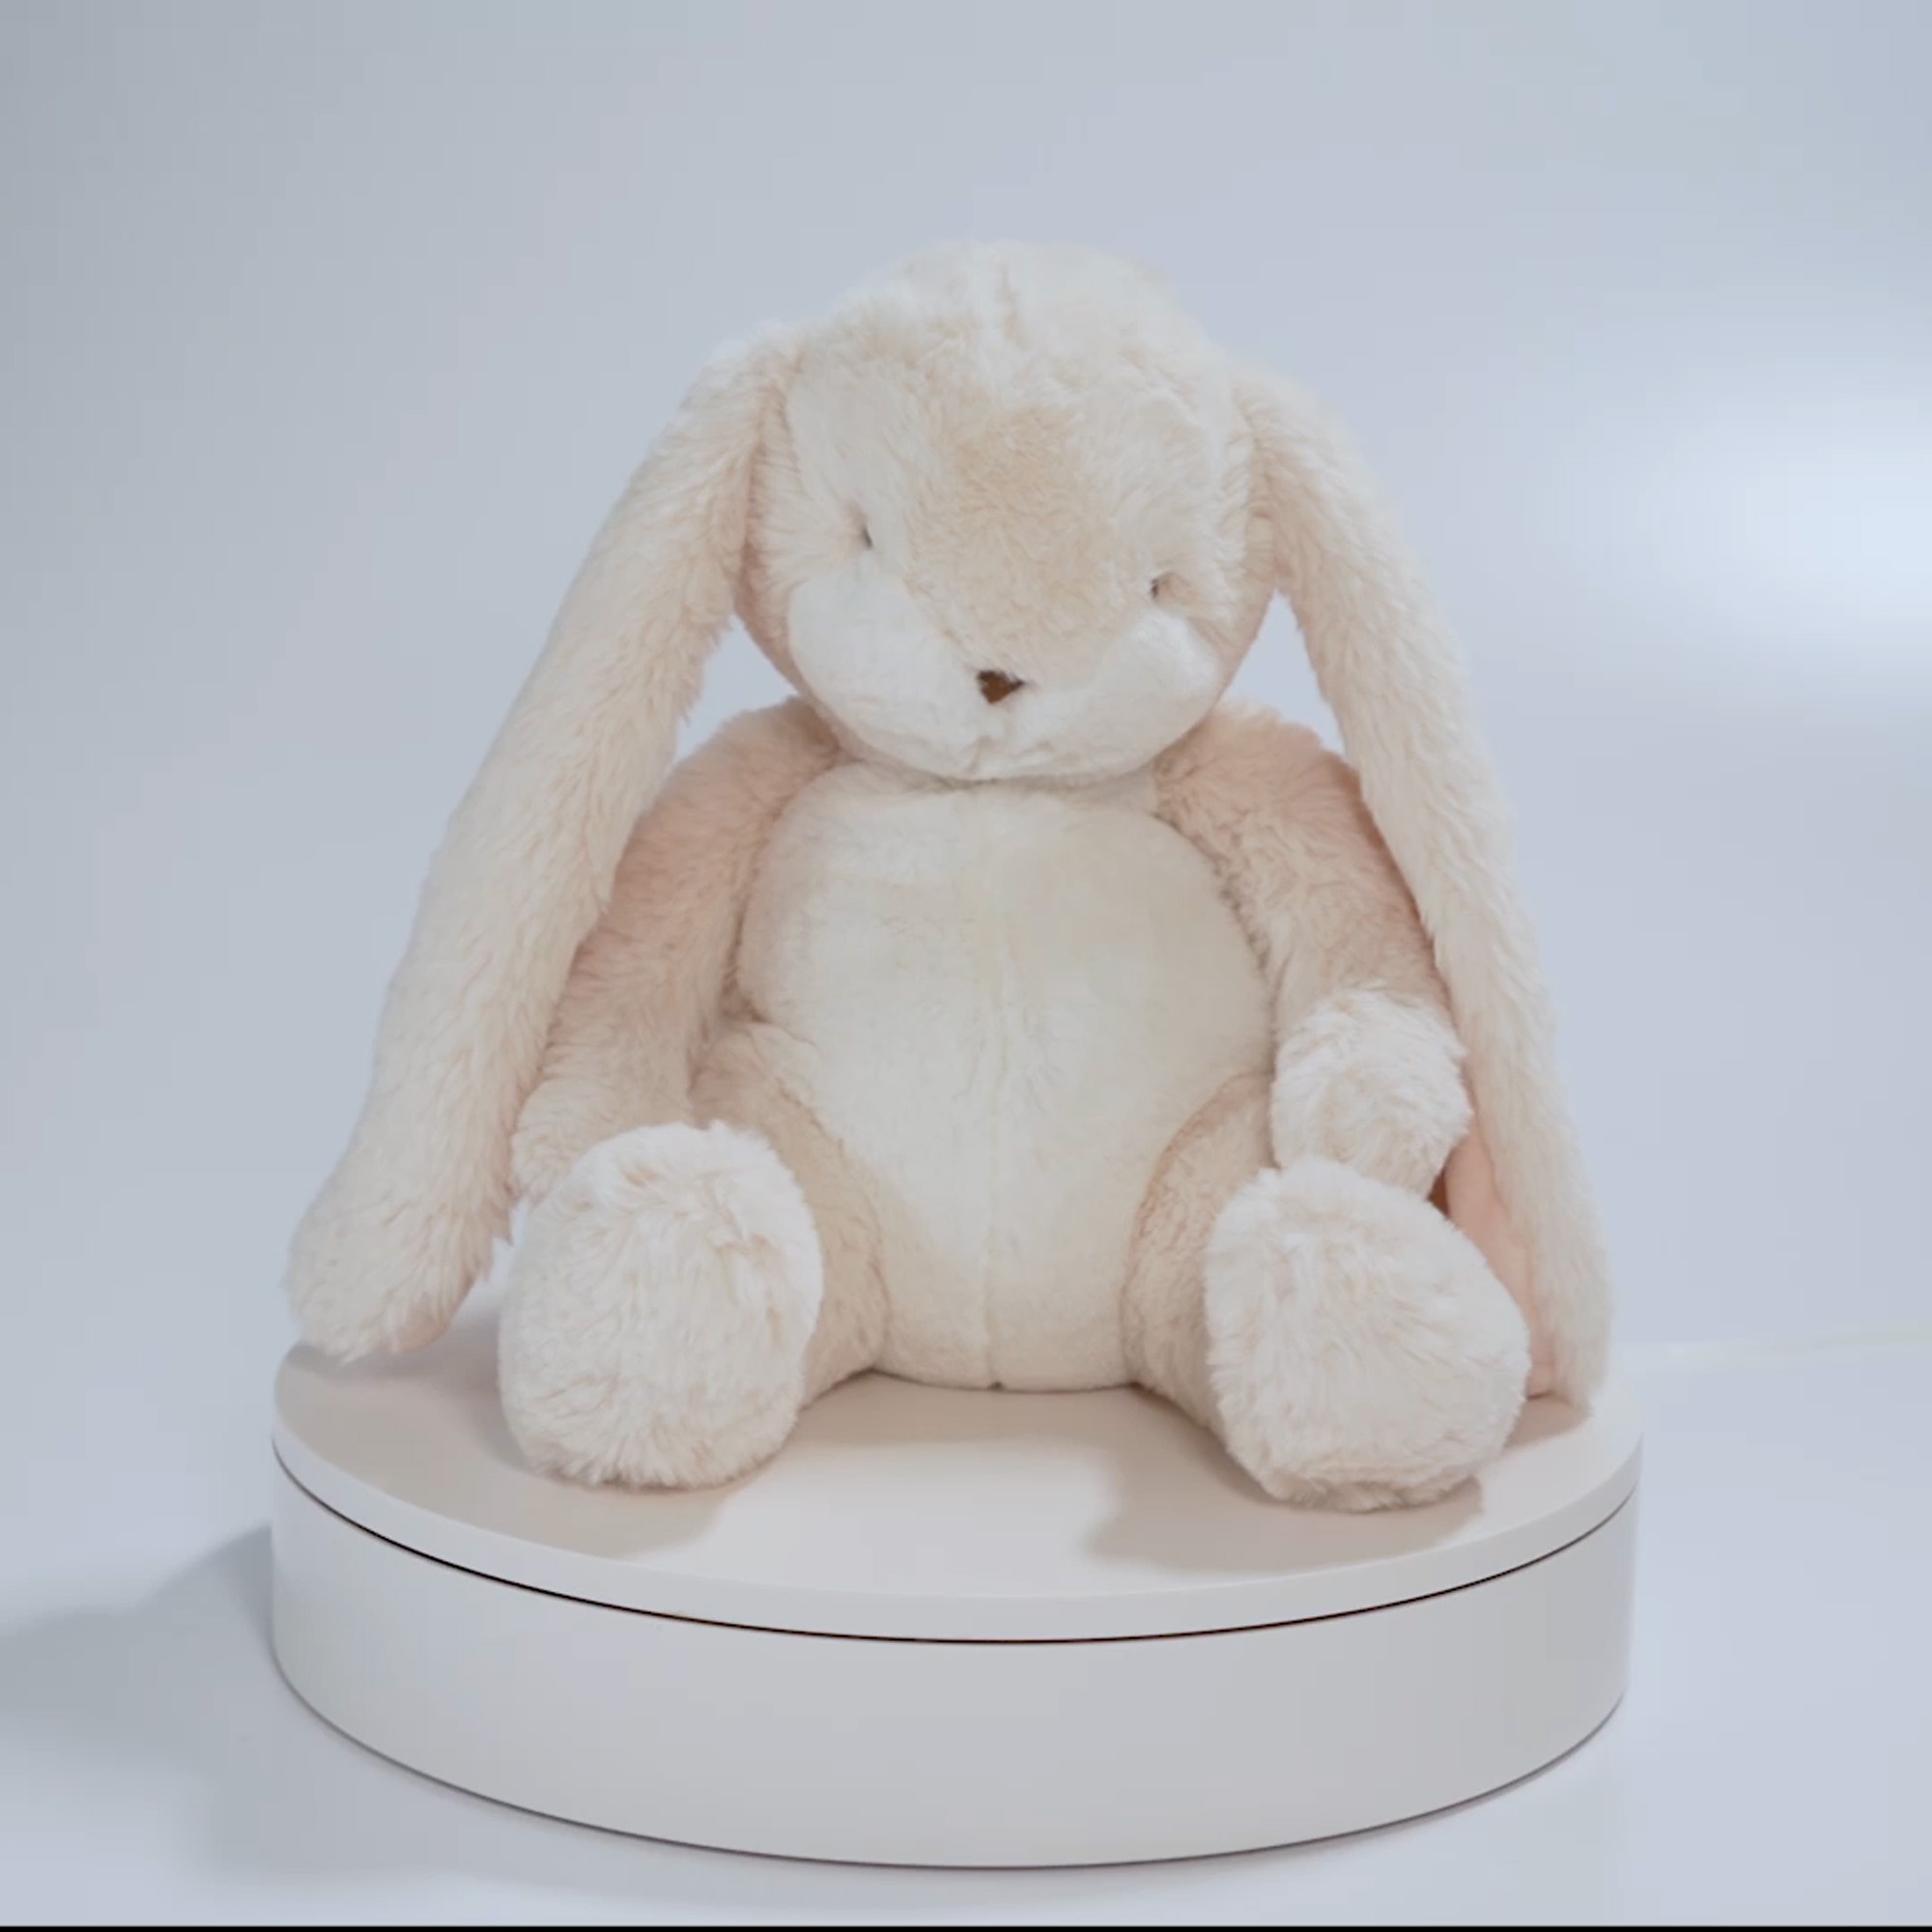 Peluche sweet nibble cream bunny 40 cm - Bunnies By The Bay